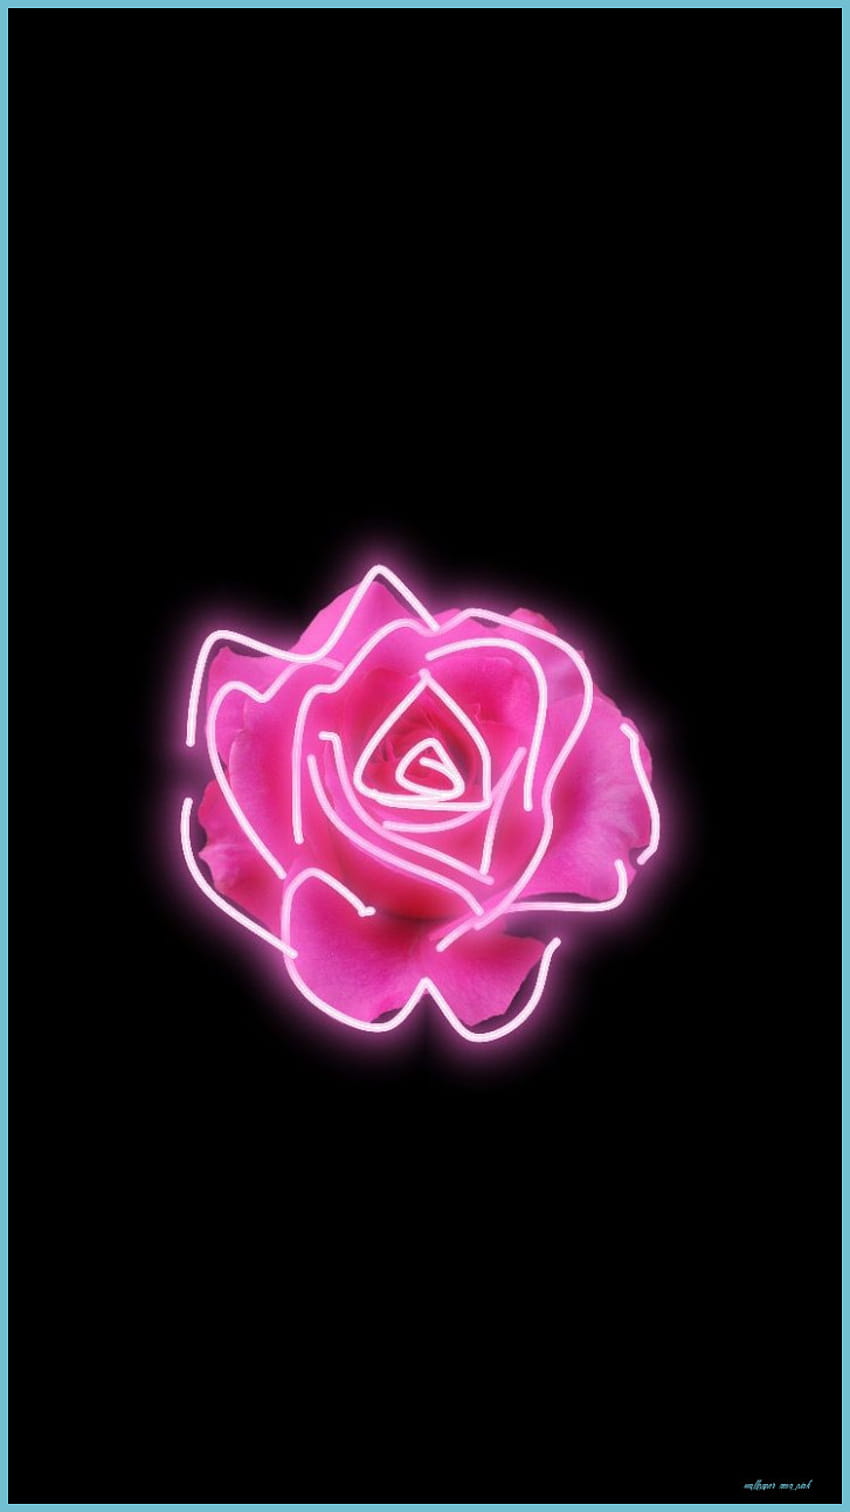 A neon pink rose on black background - Neon pink